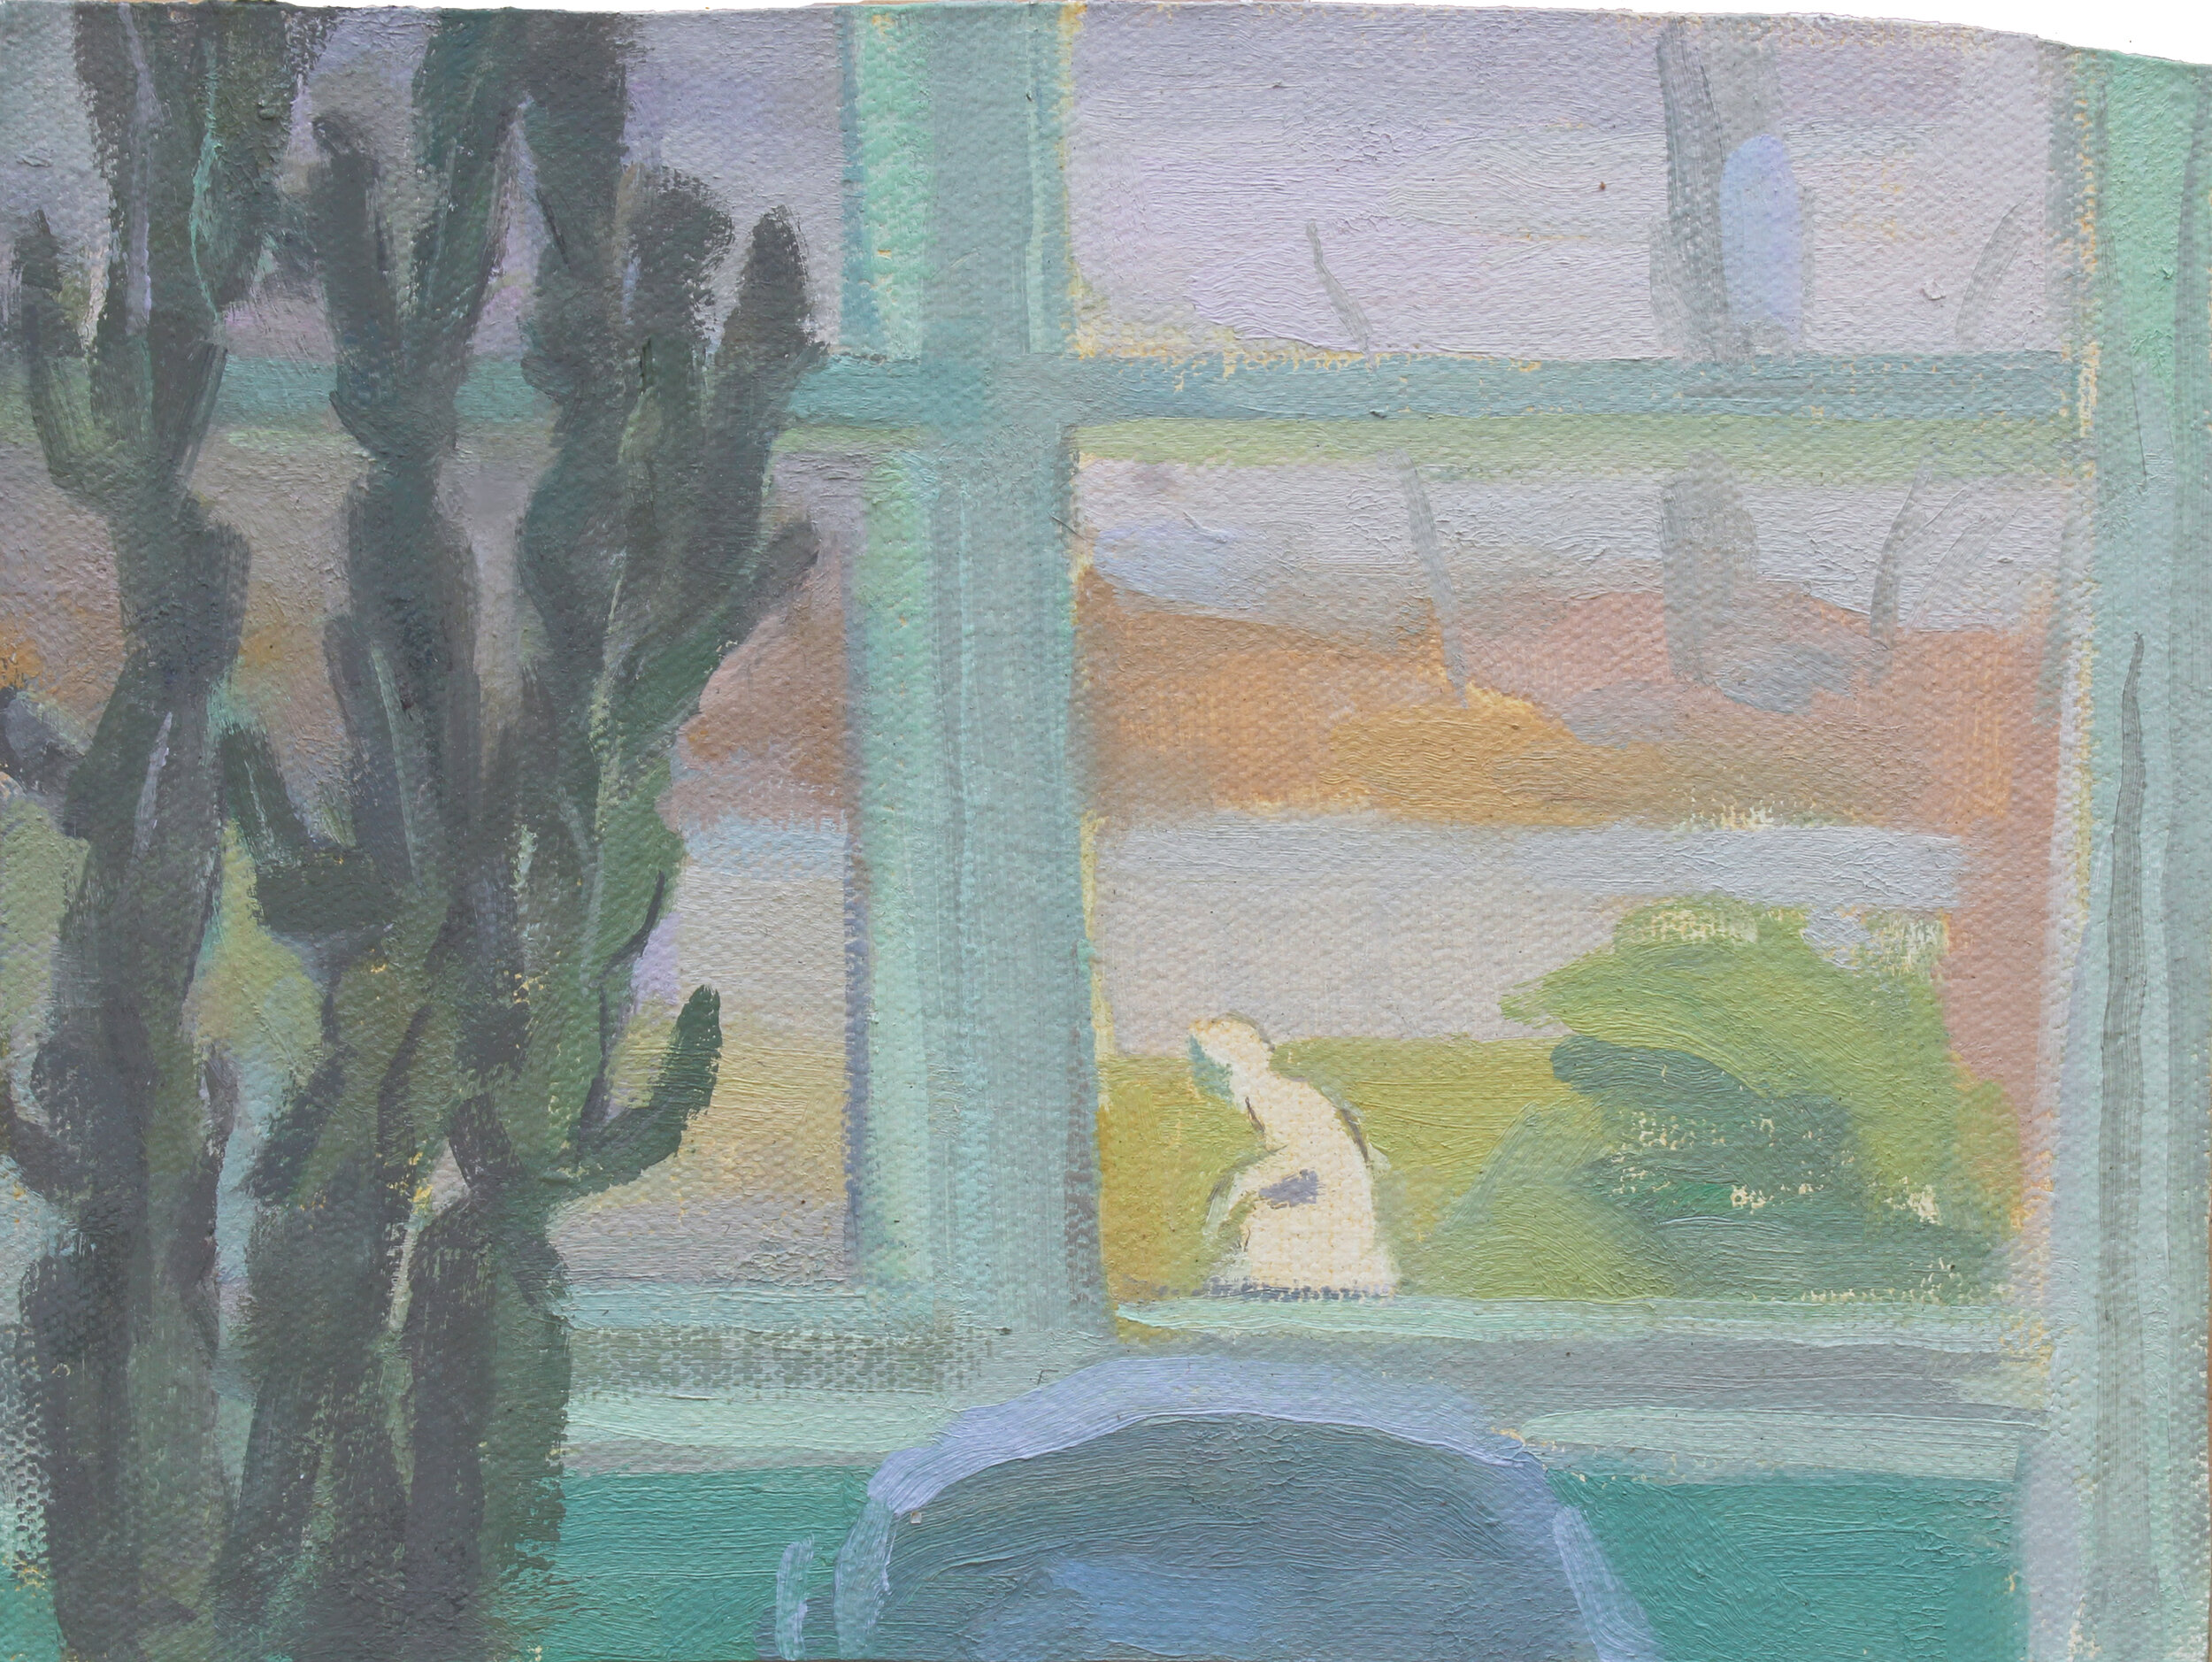    Window View with Blue Chair, Cactus, and Statue   oil on canvas 6 x 8” 2020   purchase  